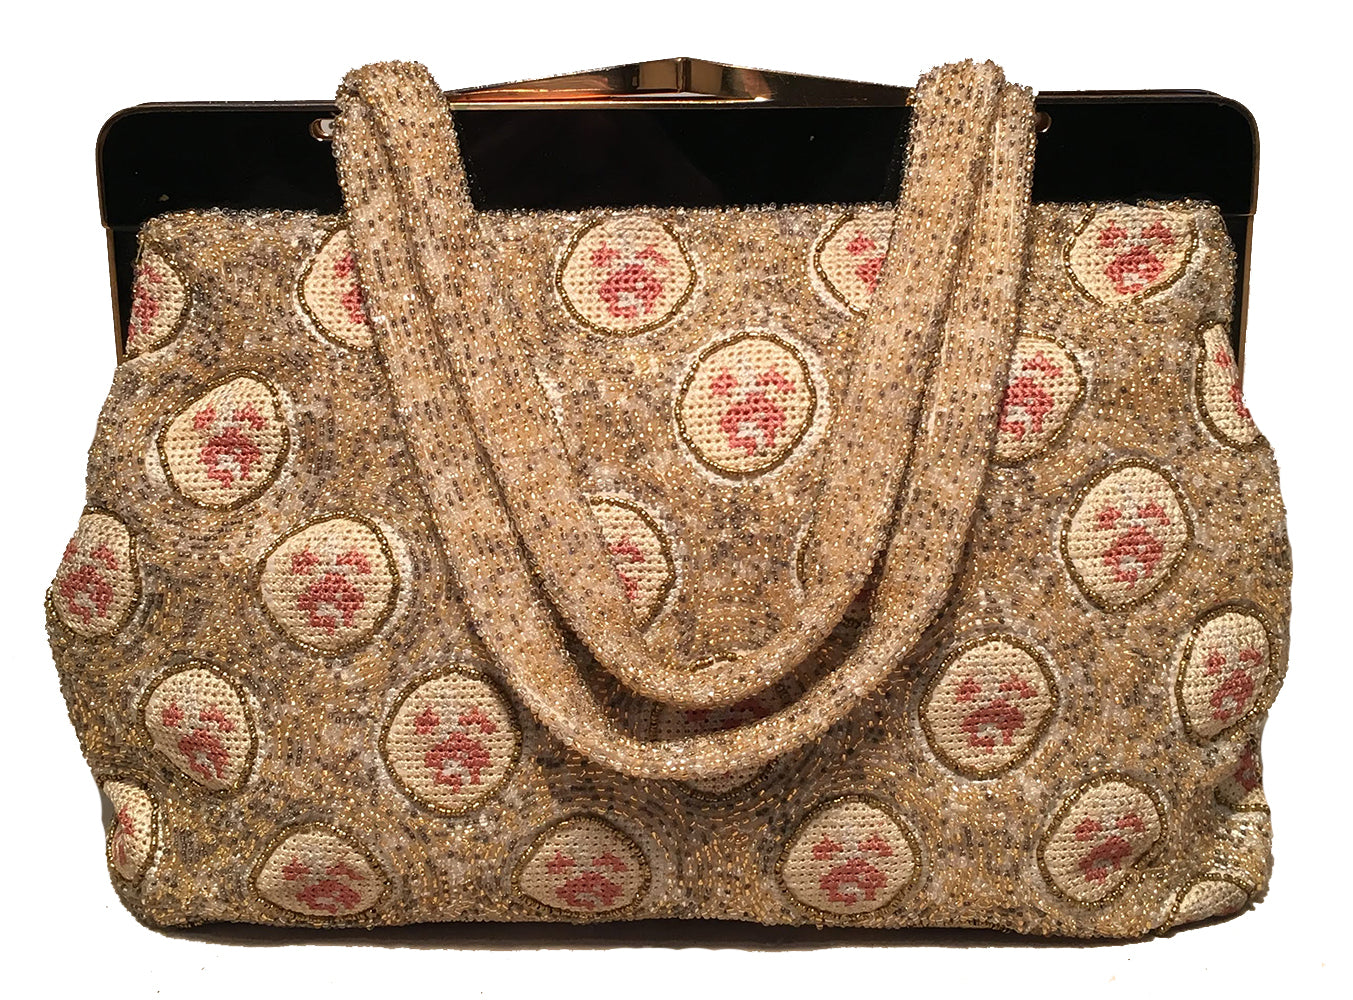 Beaded Formal 1940s Vintage Bags, Handbags & Cases for sale